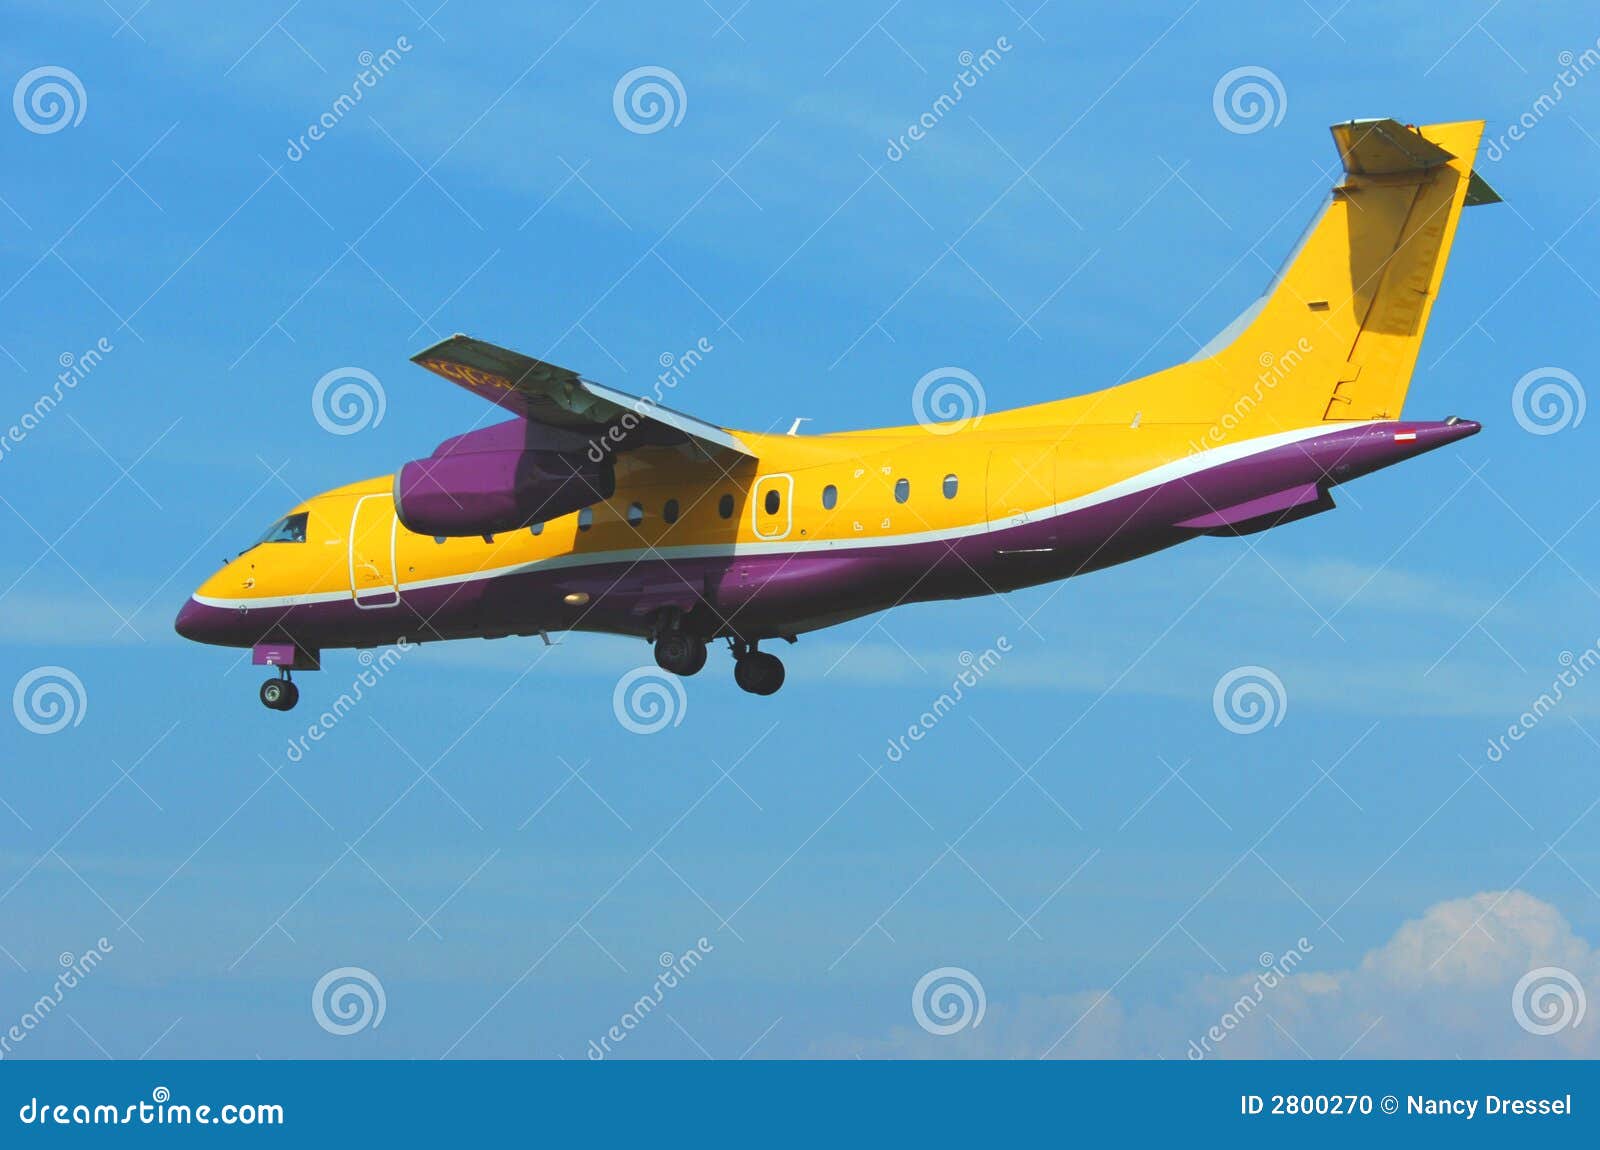 Colorful airplane stock photo. Image of colorful, aerial - 2800270